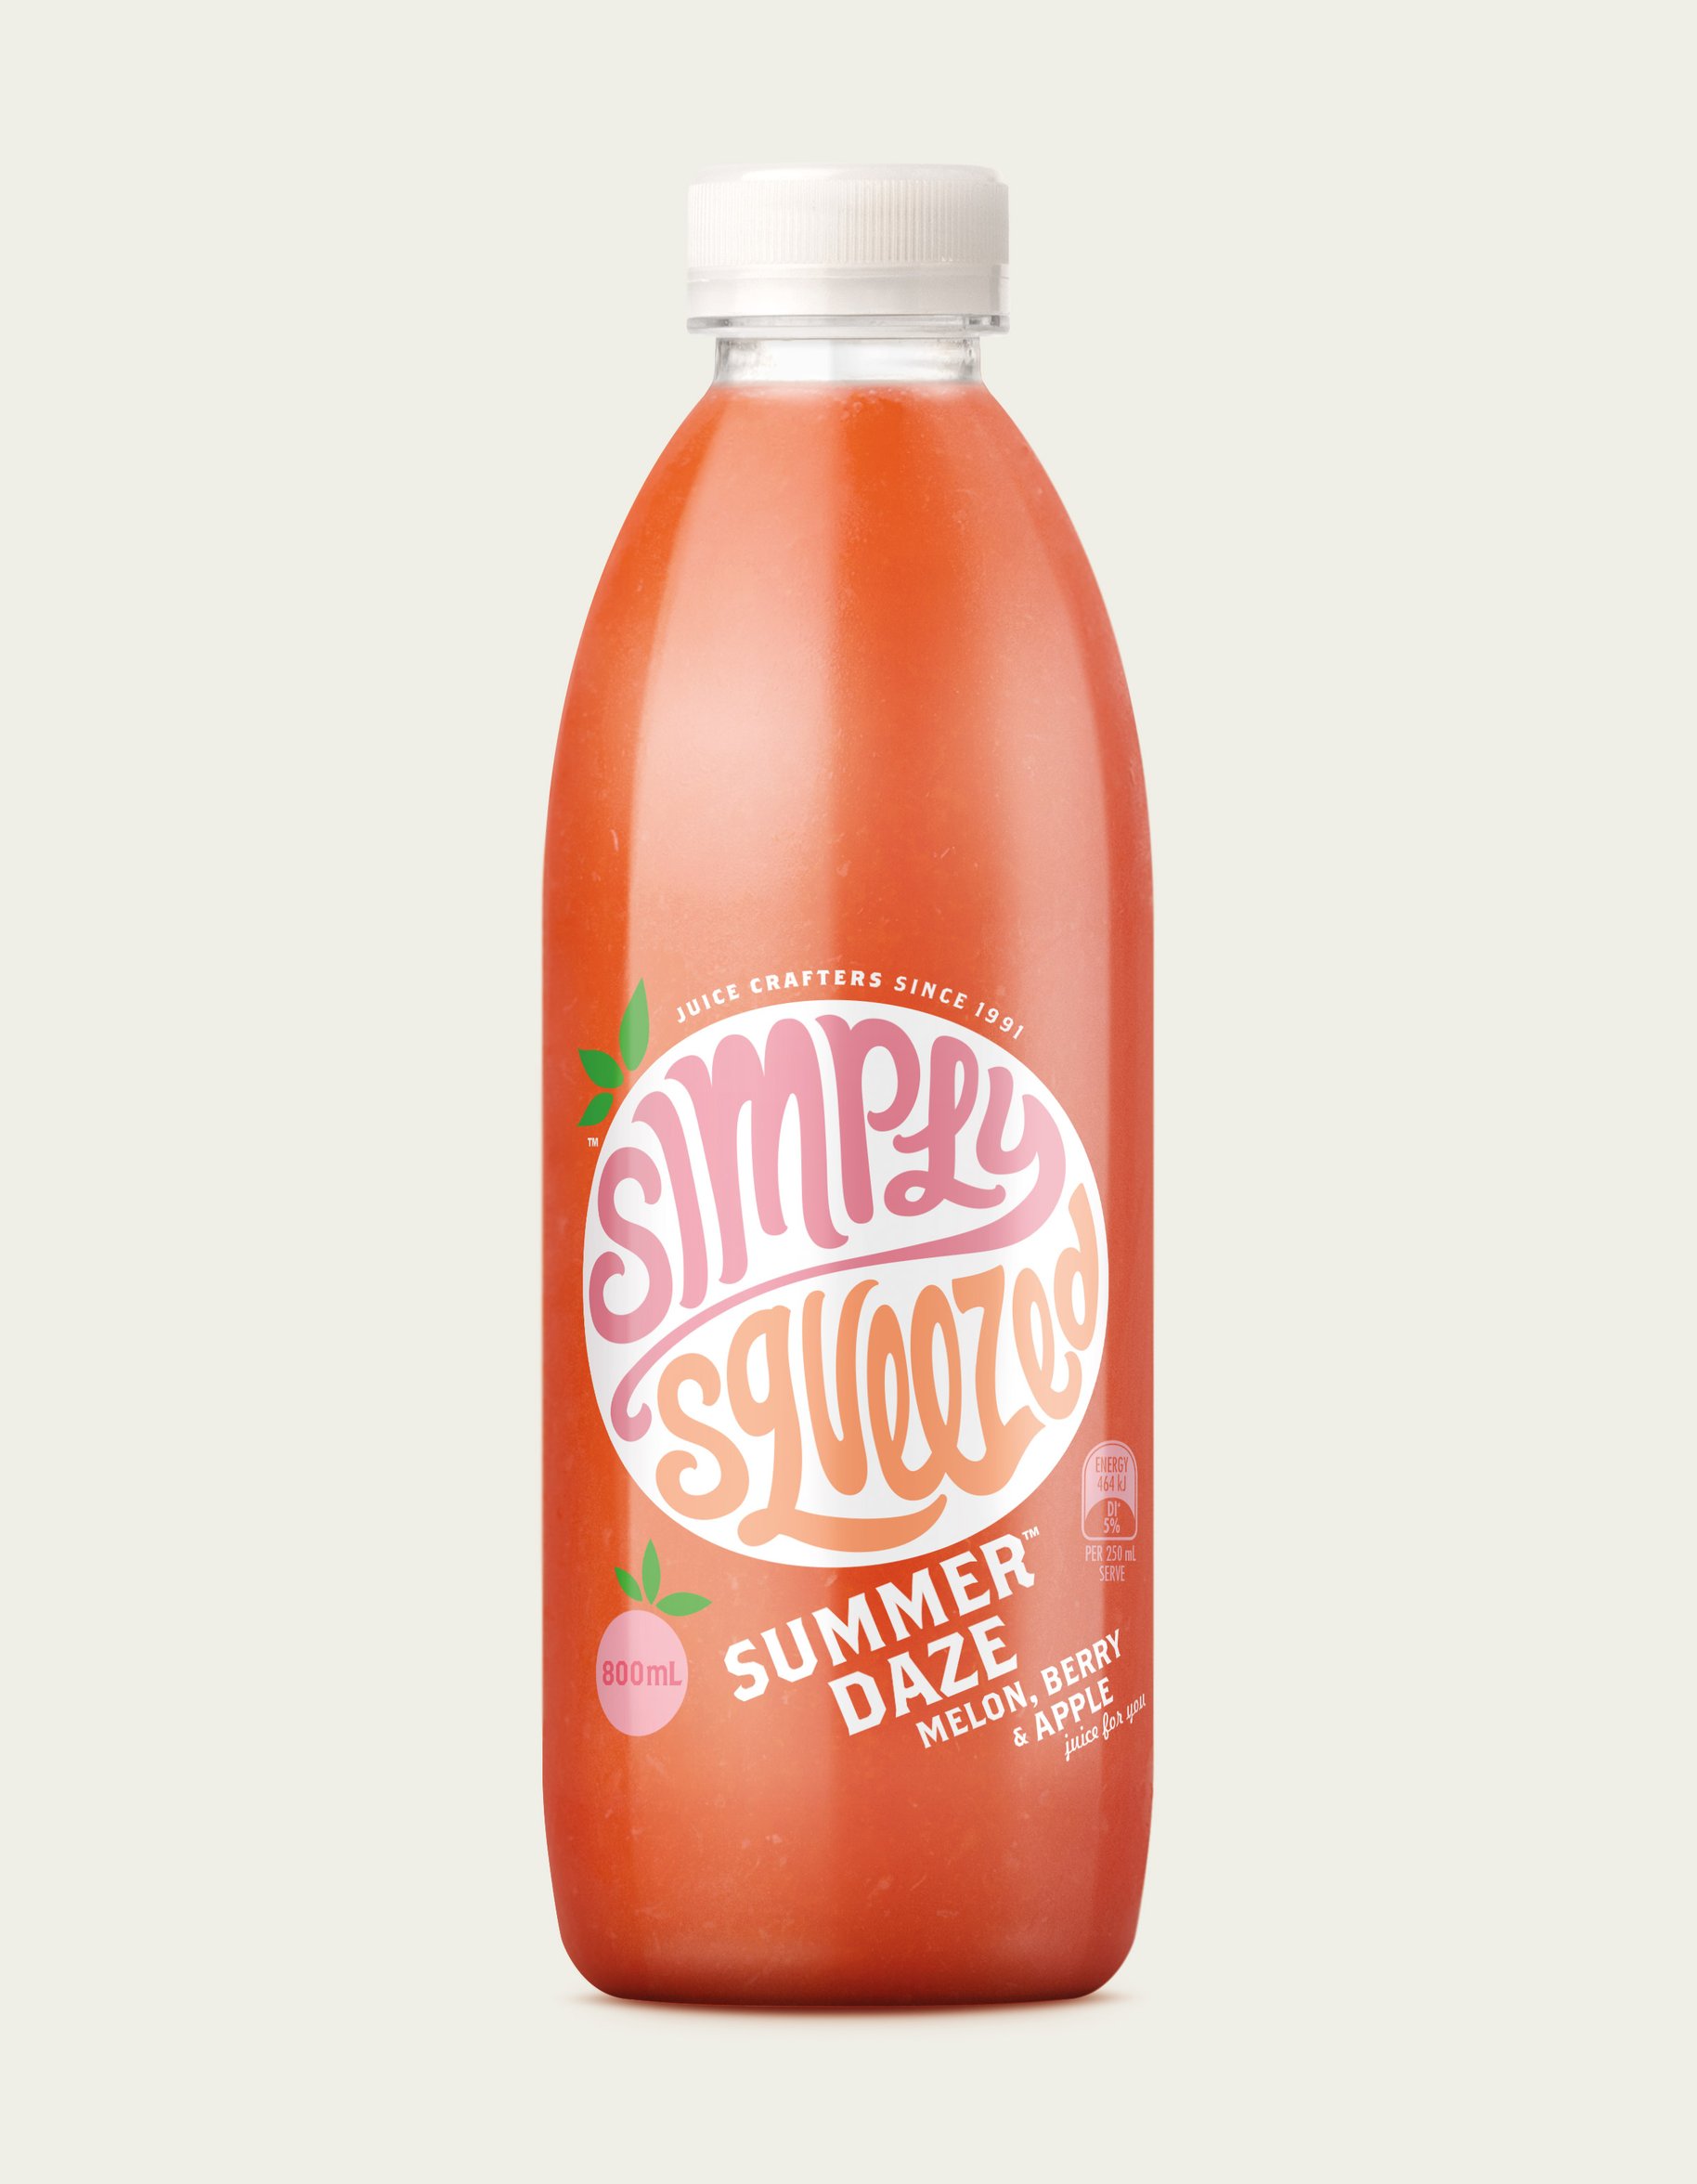 Simply Squeezed melon berry Juice Packaging Design 